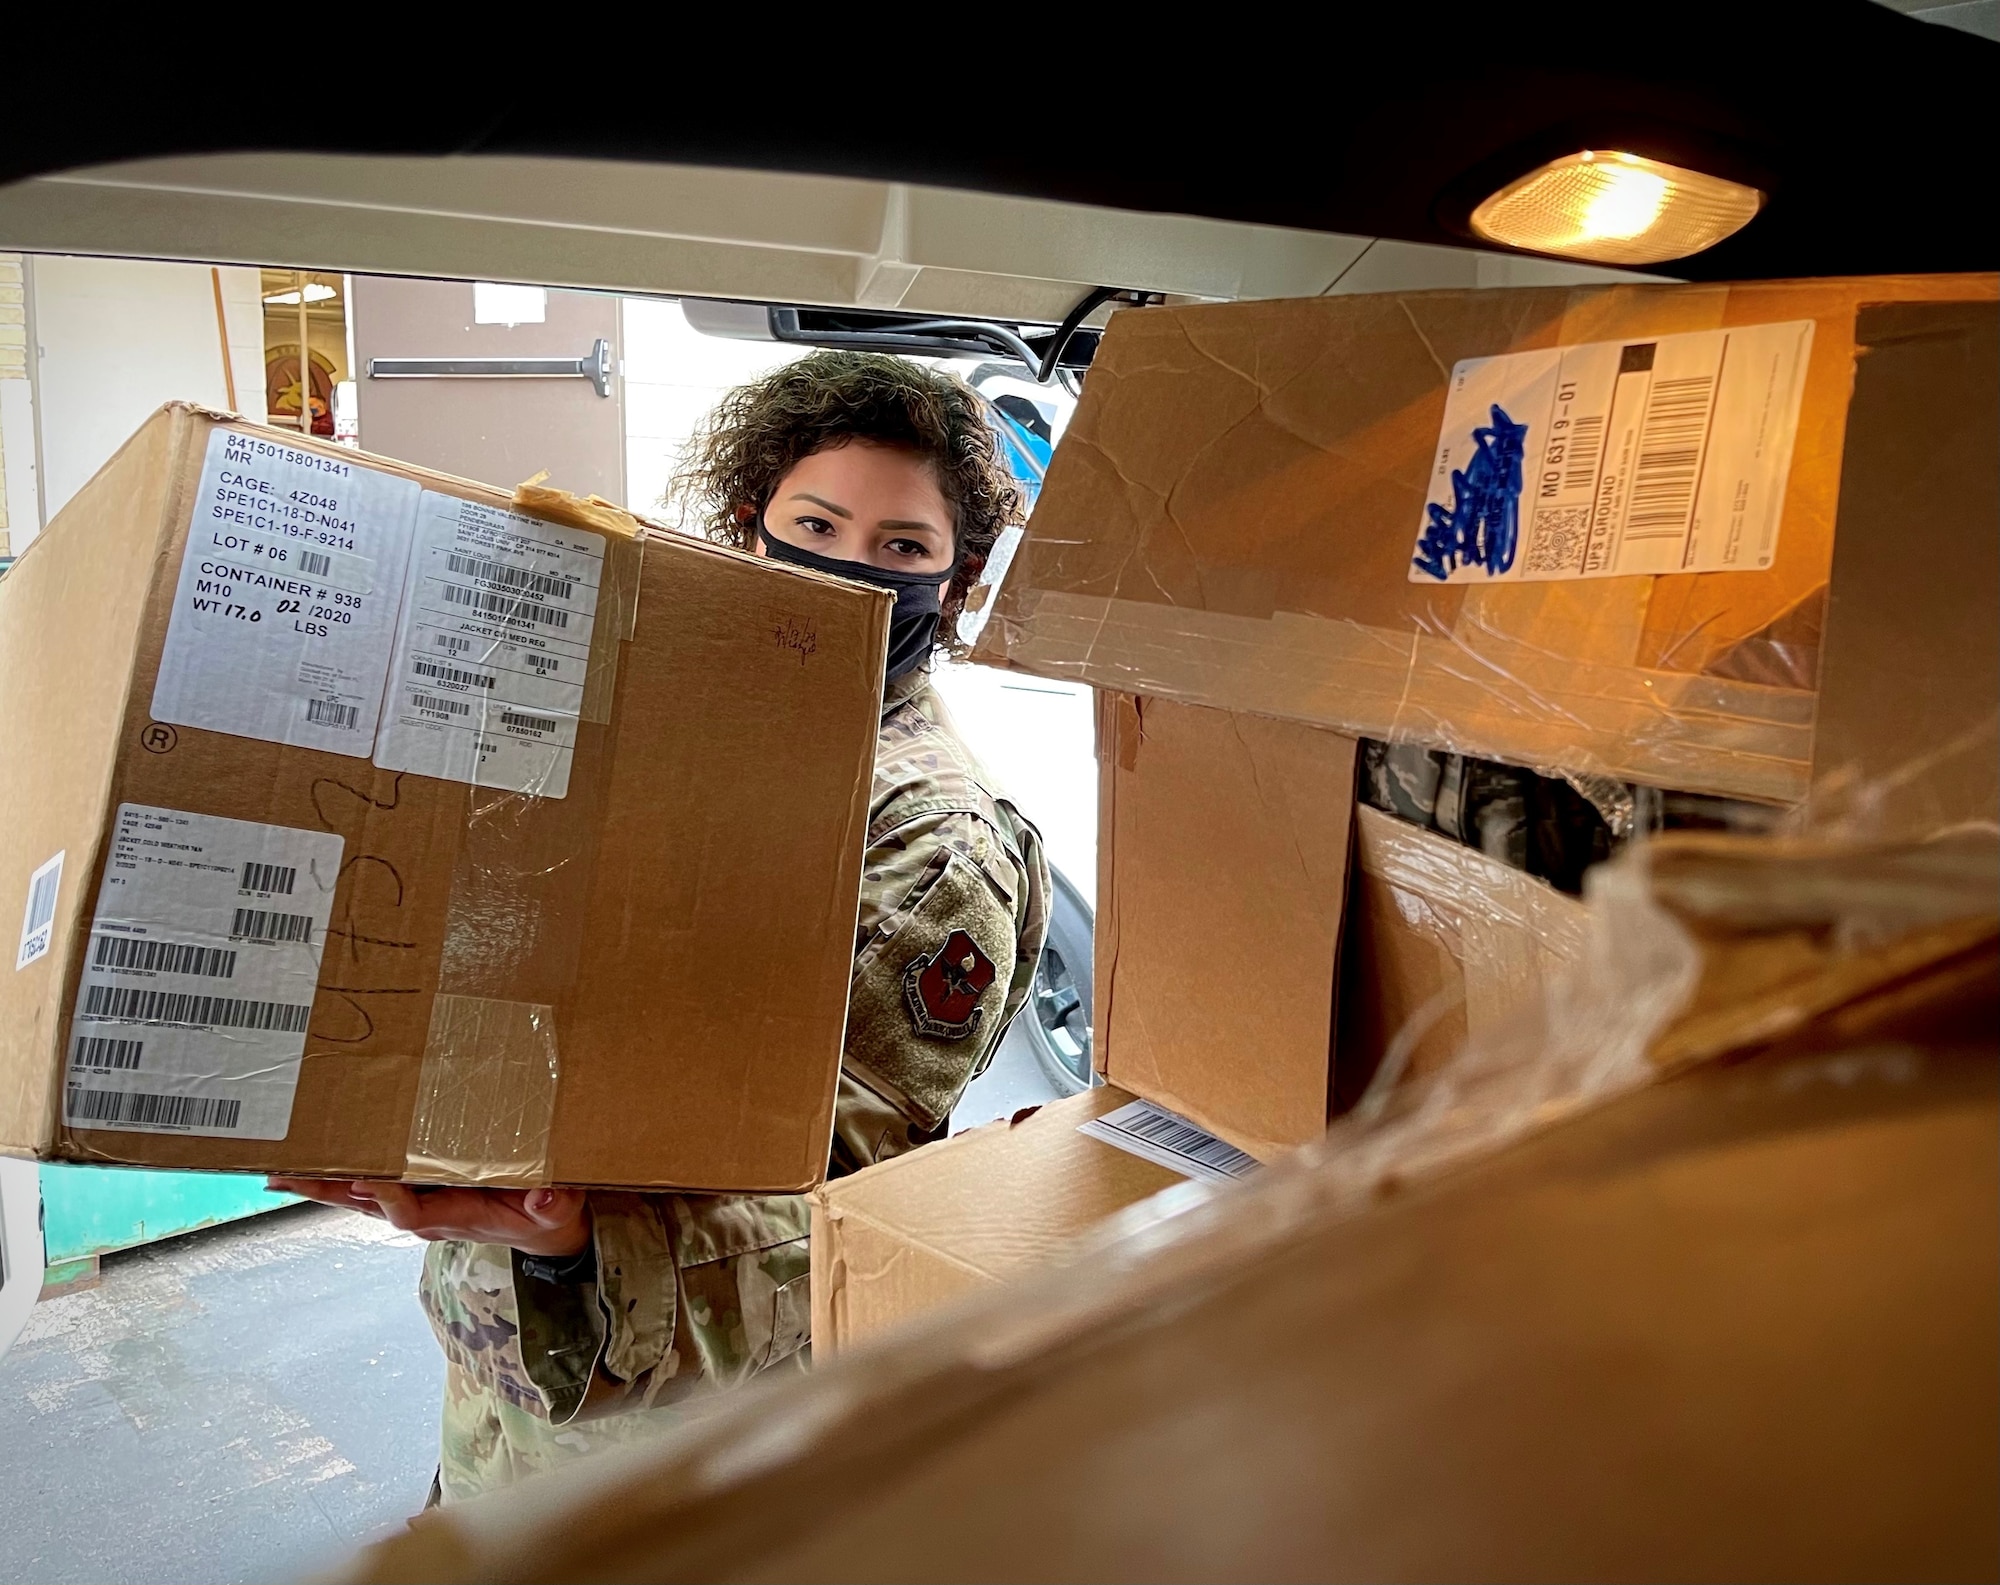 U.S. Air Force Master Sgt. Coralys Ross, noncommissioned officer in charge of Air Force ROTC Detachment 207, loads boxes filled with Airman Battle Uniform items into a car during a donation event at Saint Louis University, St. Louis, Missouri Dec. 18, 2020. The donation to a local Air Force Junior ROTC detachment, valued at more than $20,000, resulted from the transition of Air Force ROTC cadets to the Operational Camouflage Pattern uniform during the Fall 2020 academic semester.